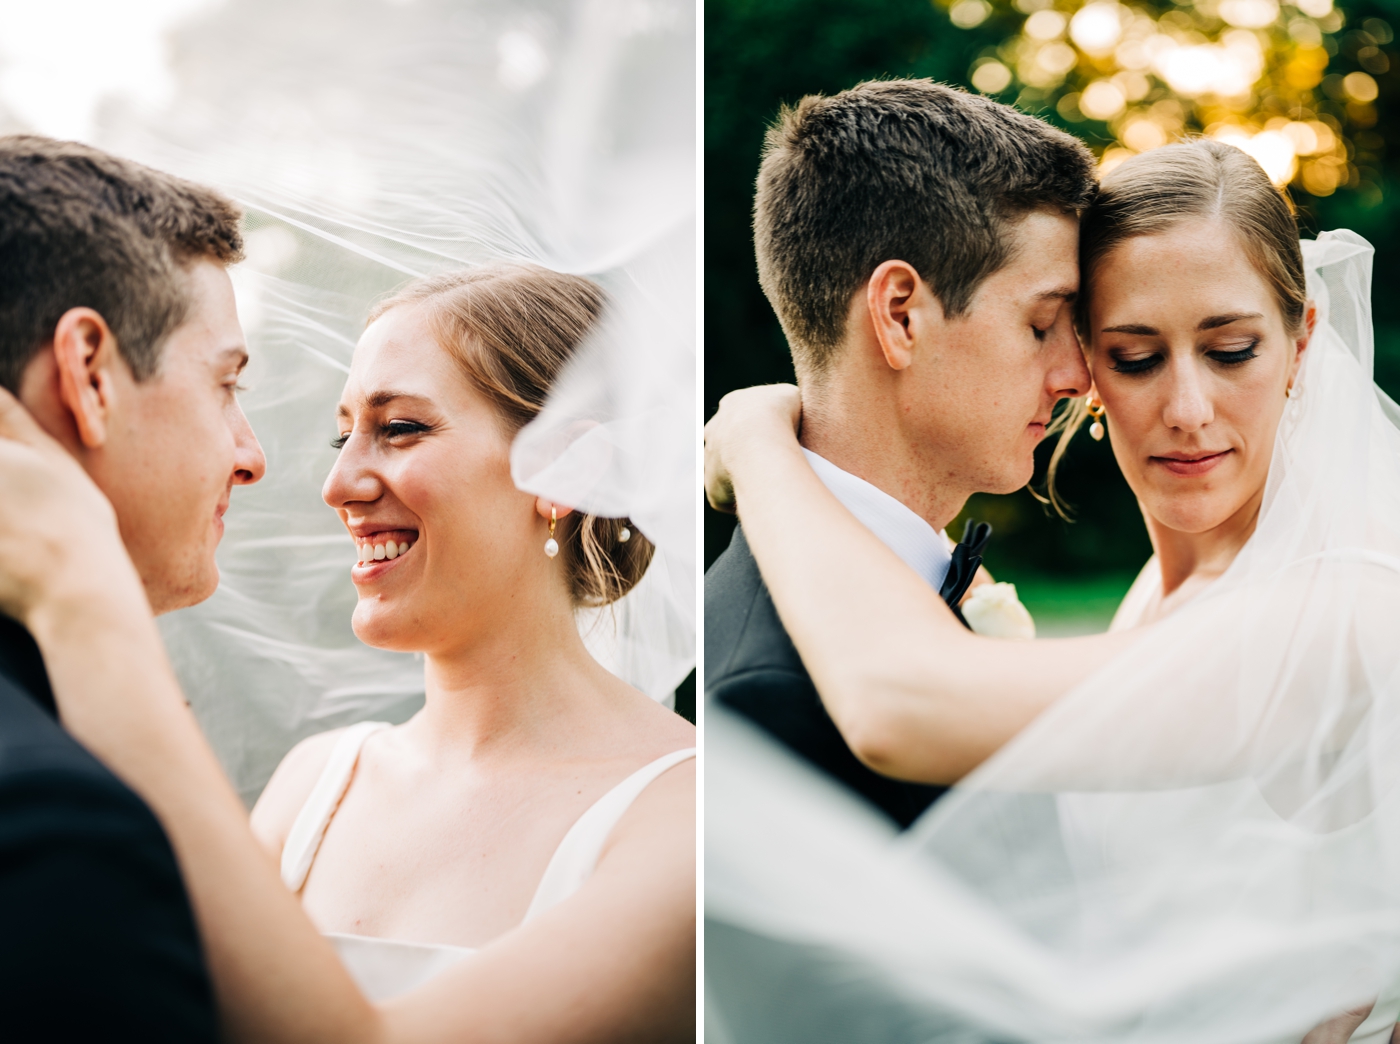 Bride and groom portraits by Mika LH Photography